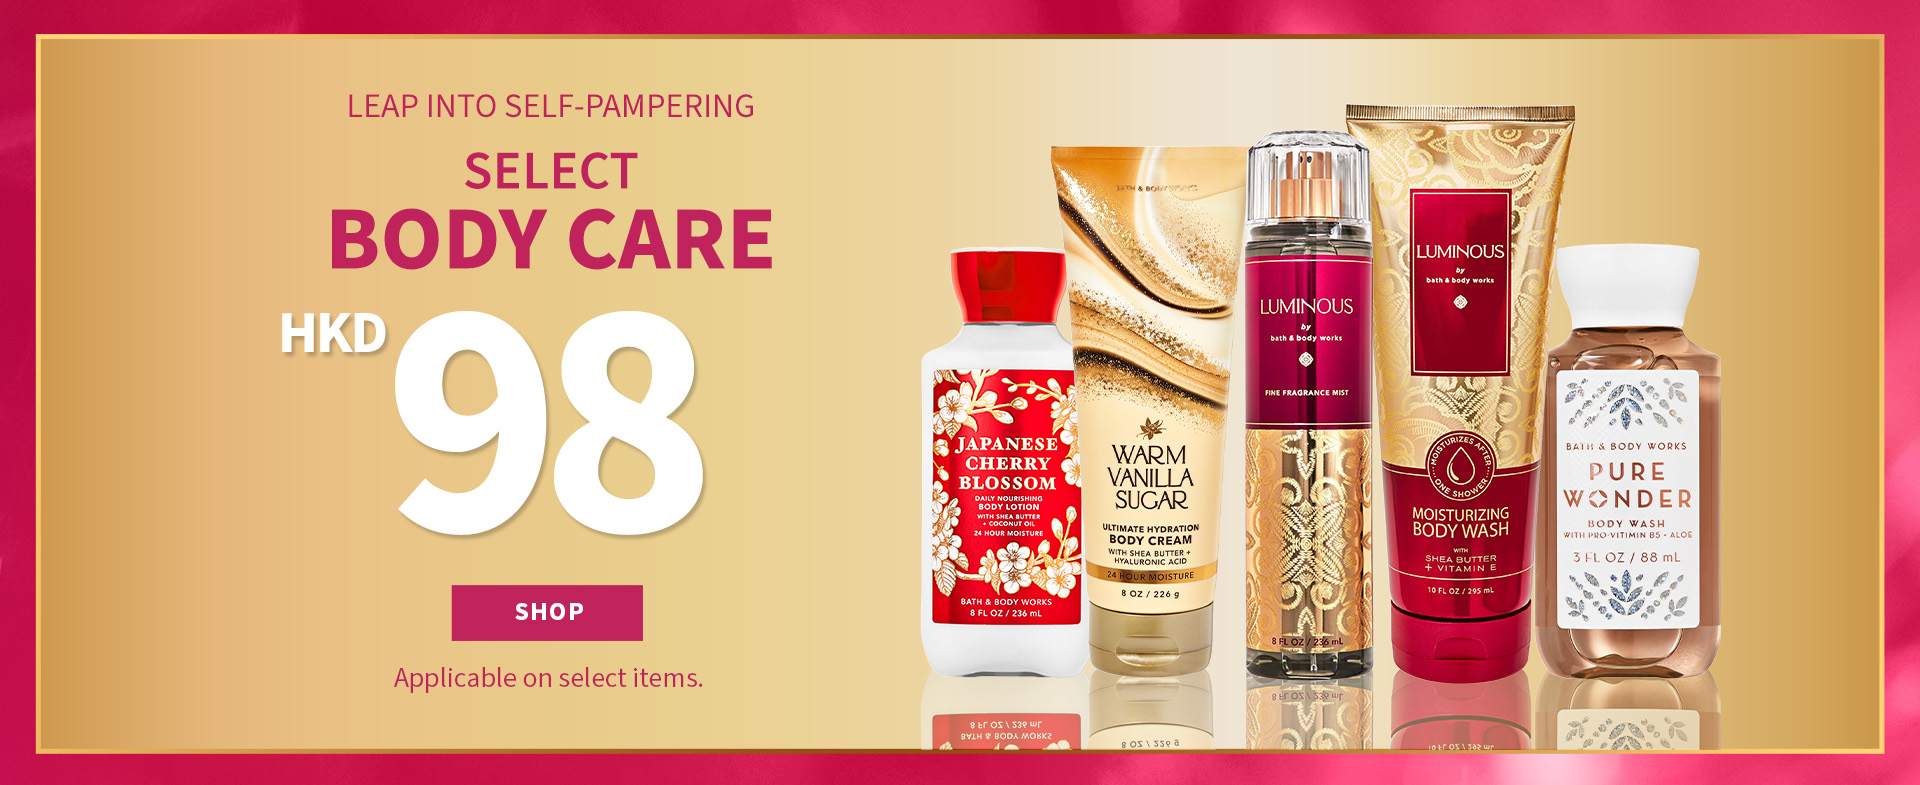 Feb Hk Leap Into Self-Pampering Select Body Care $$